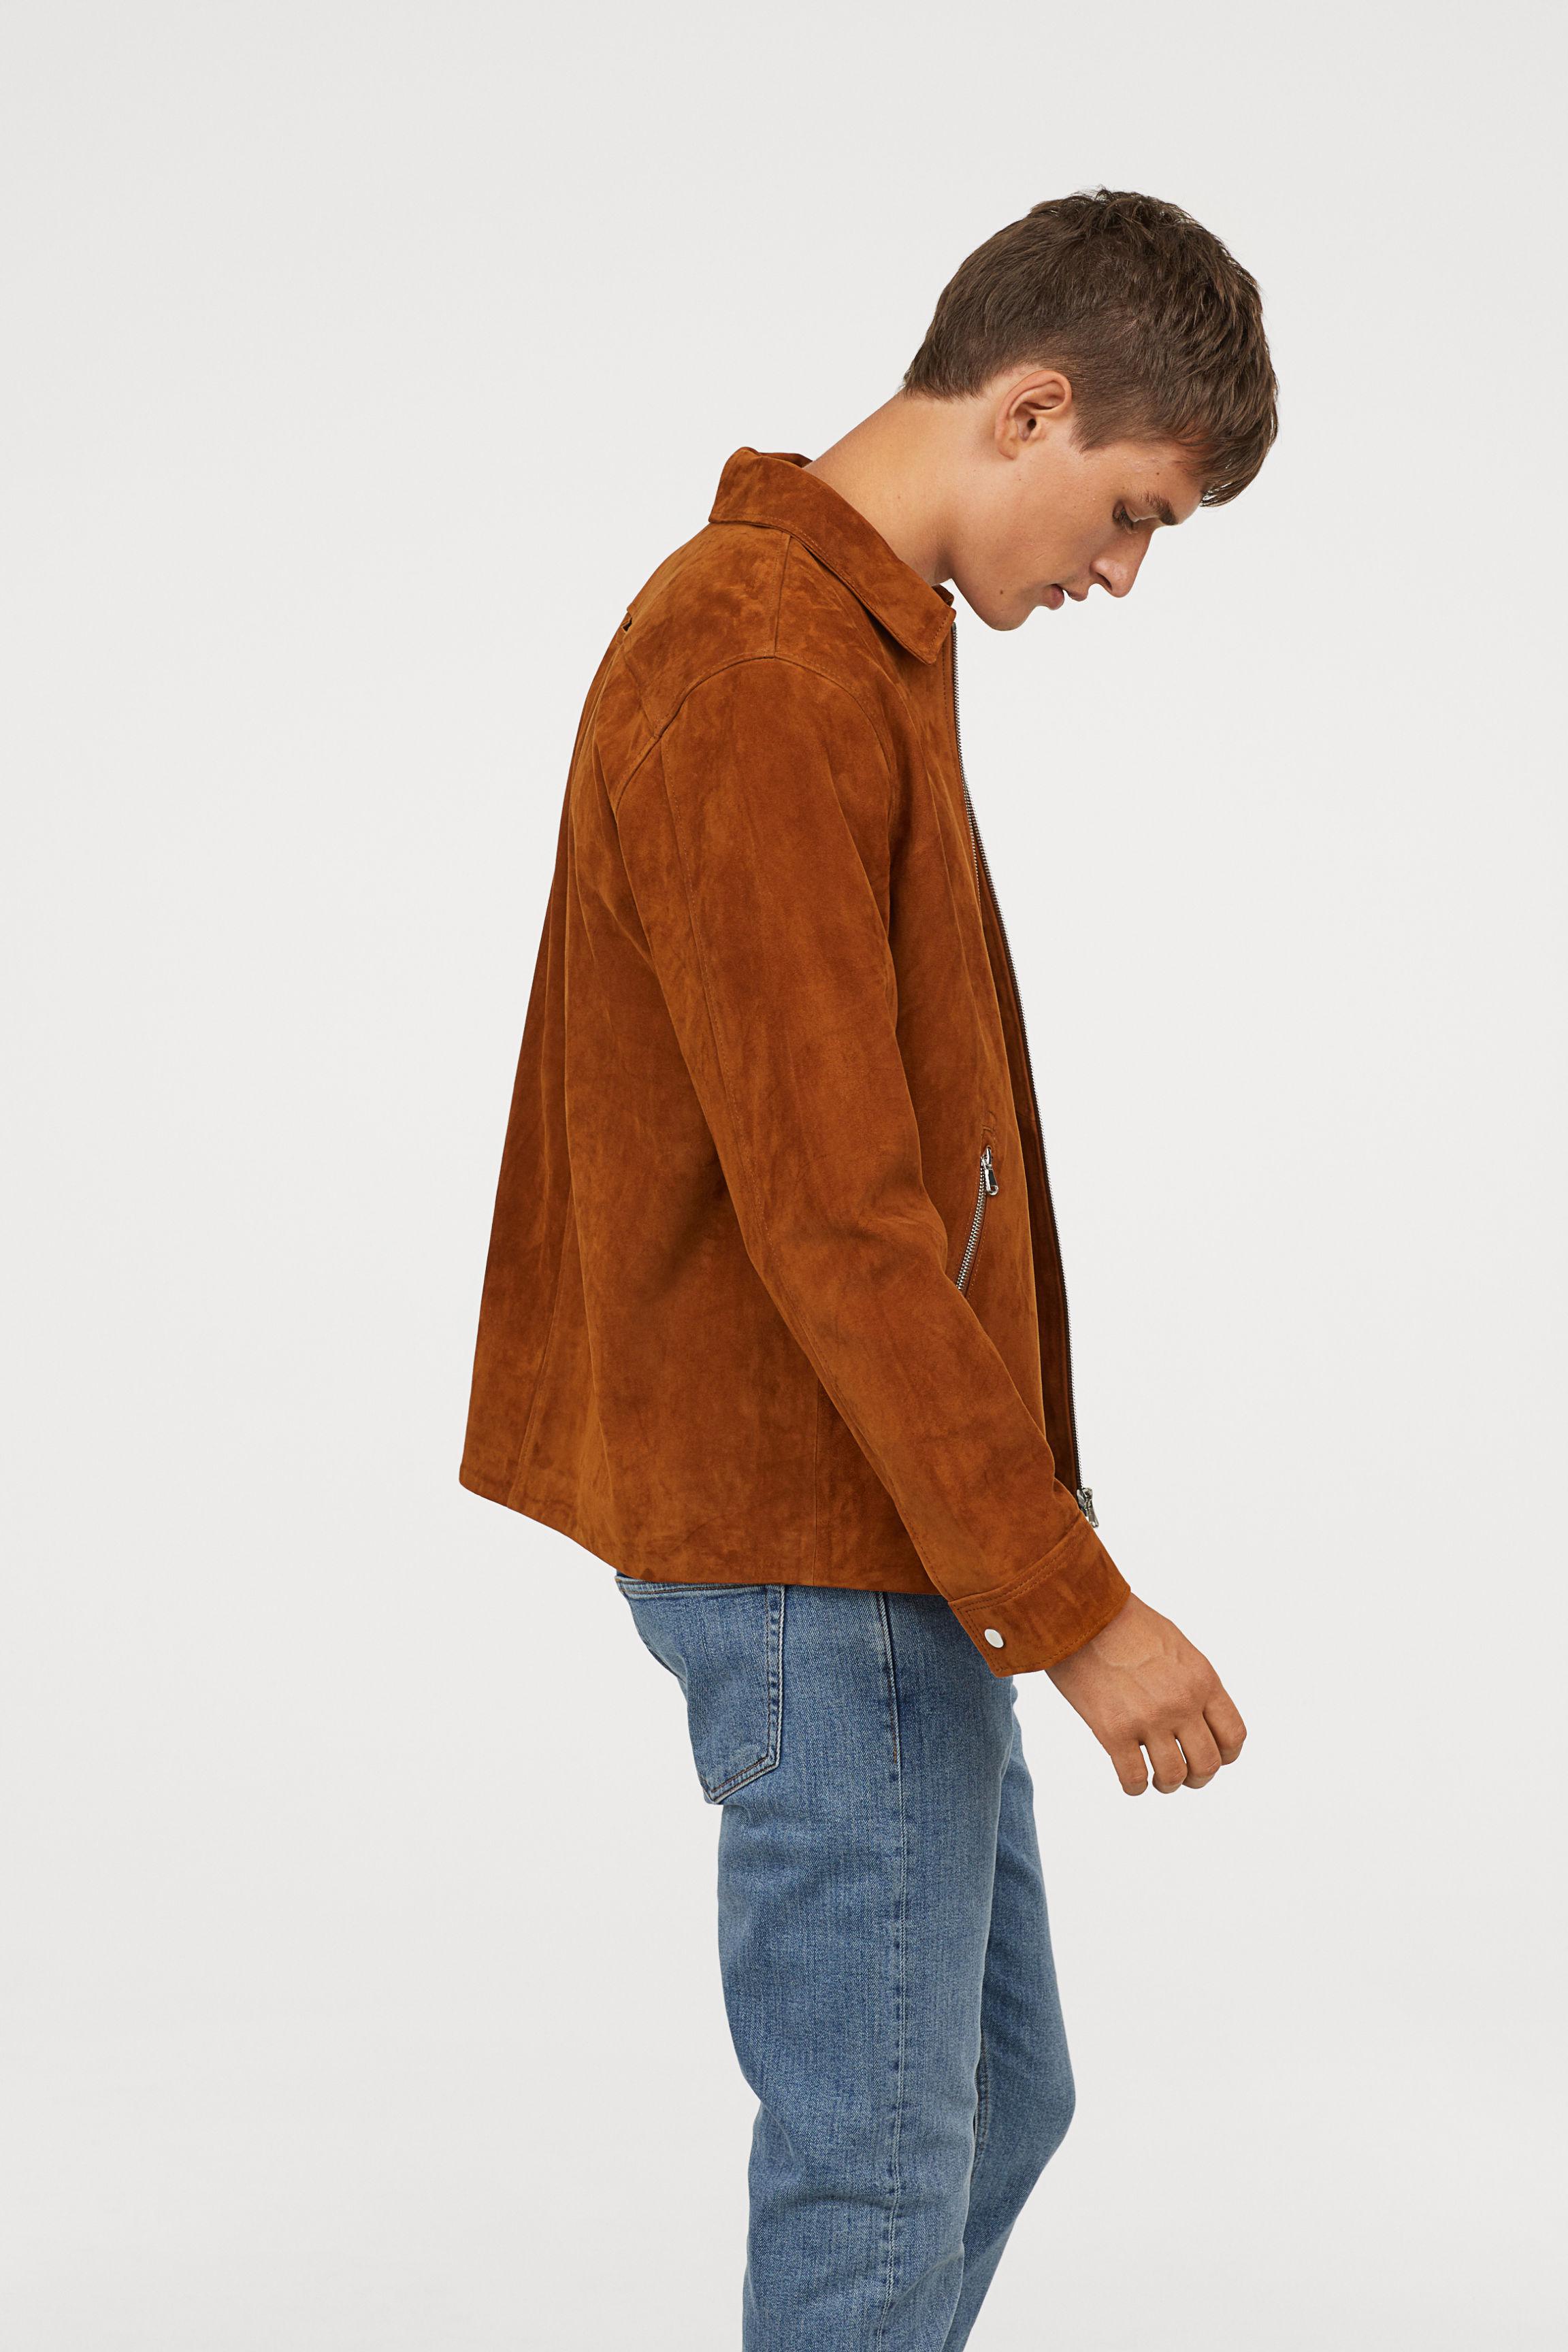 H&M Suede Shirt Jacket in Brown for Men | Lyst